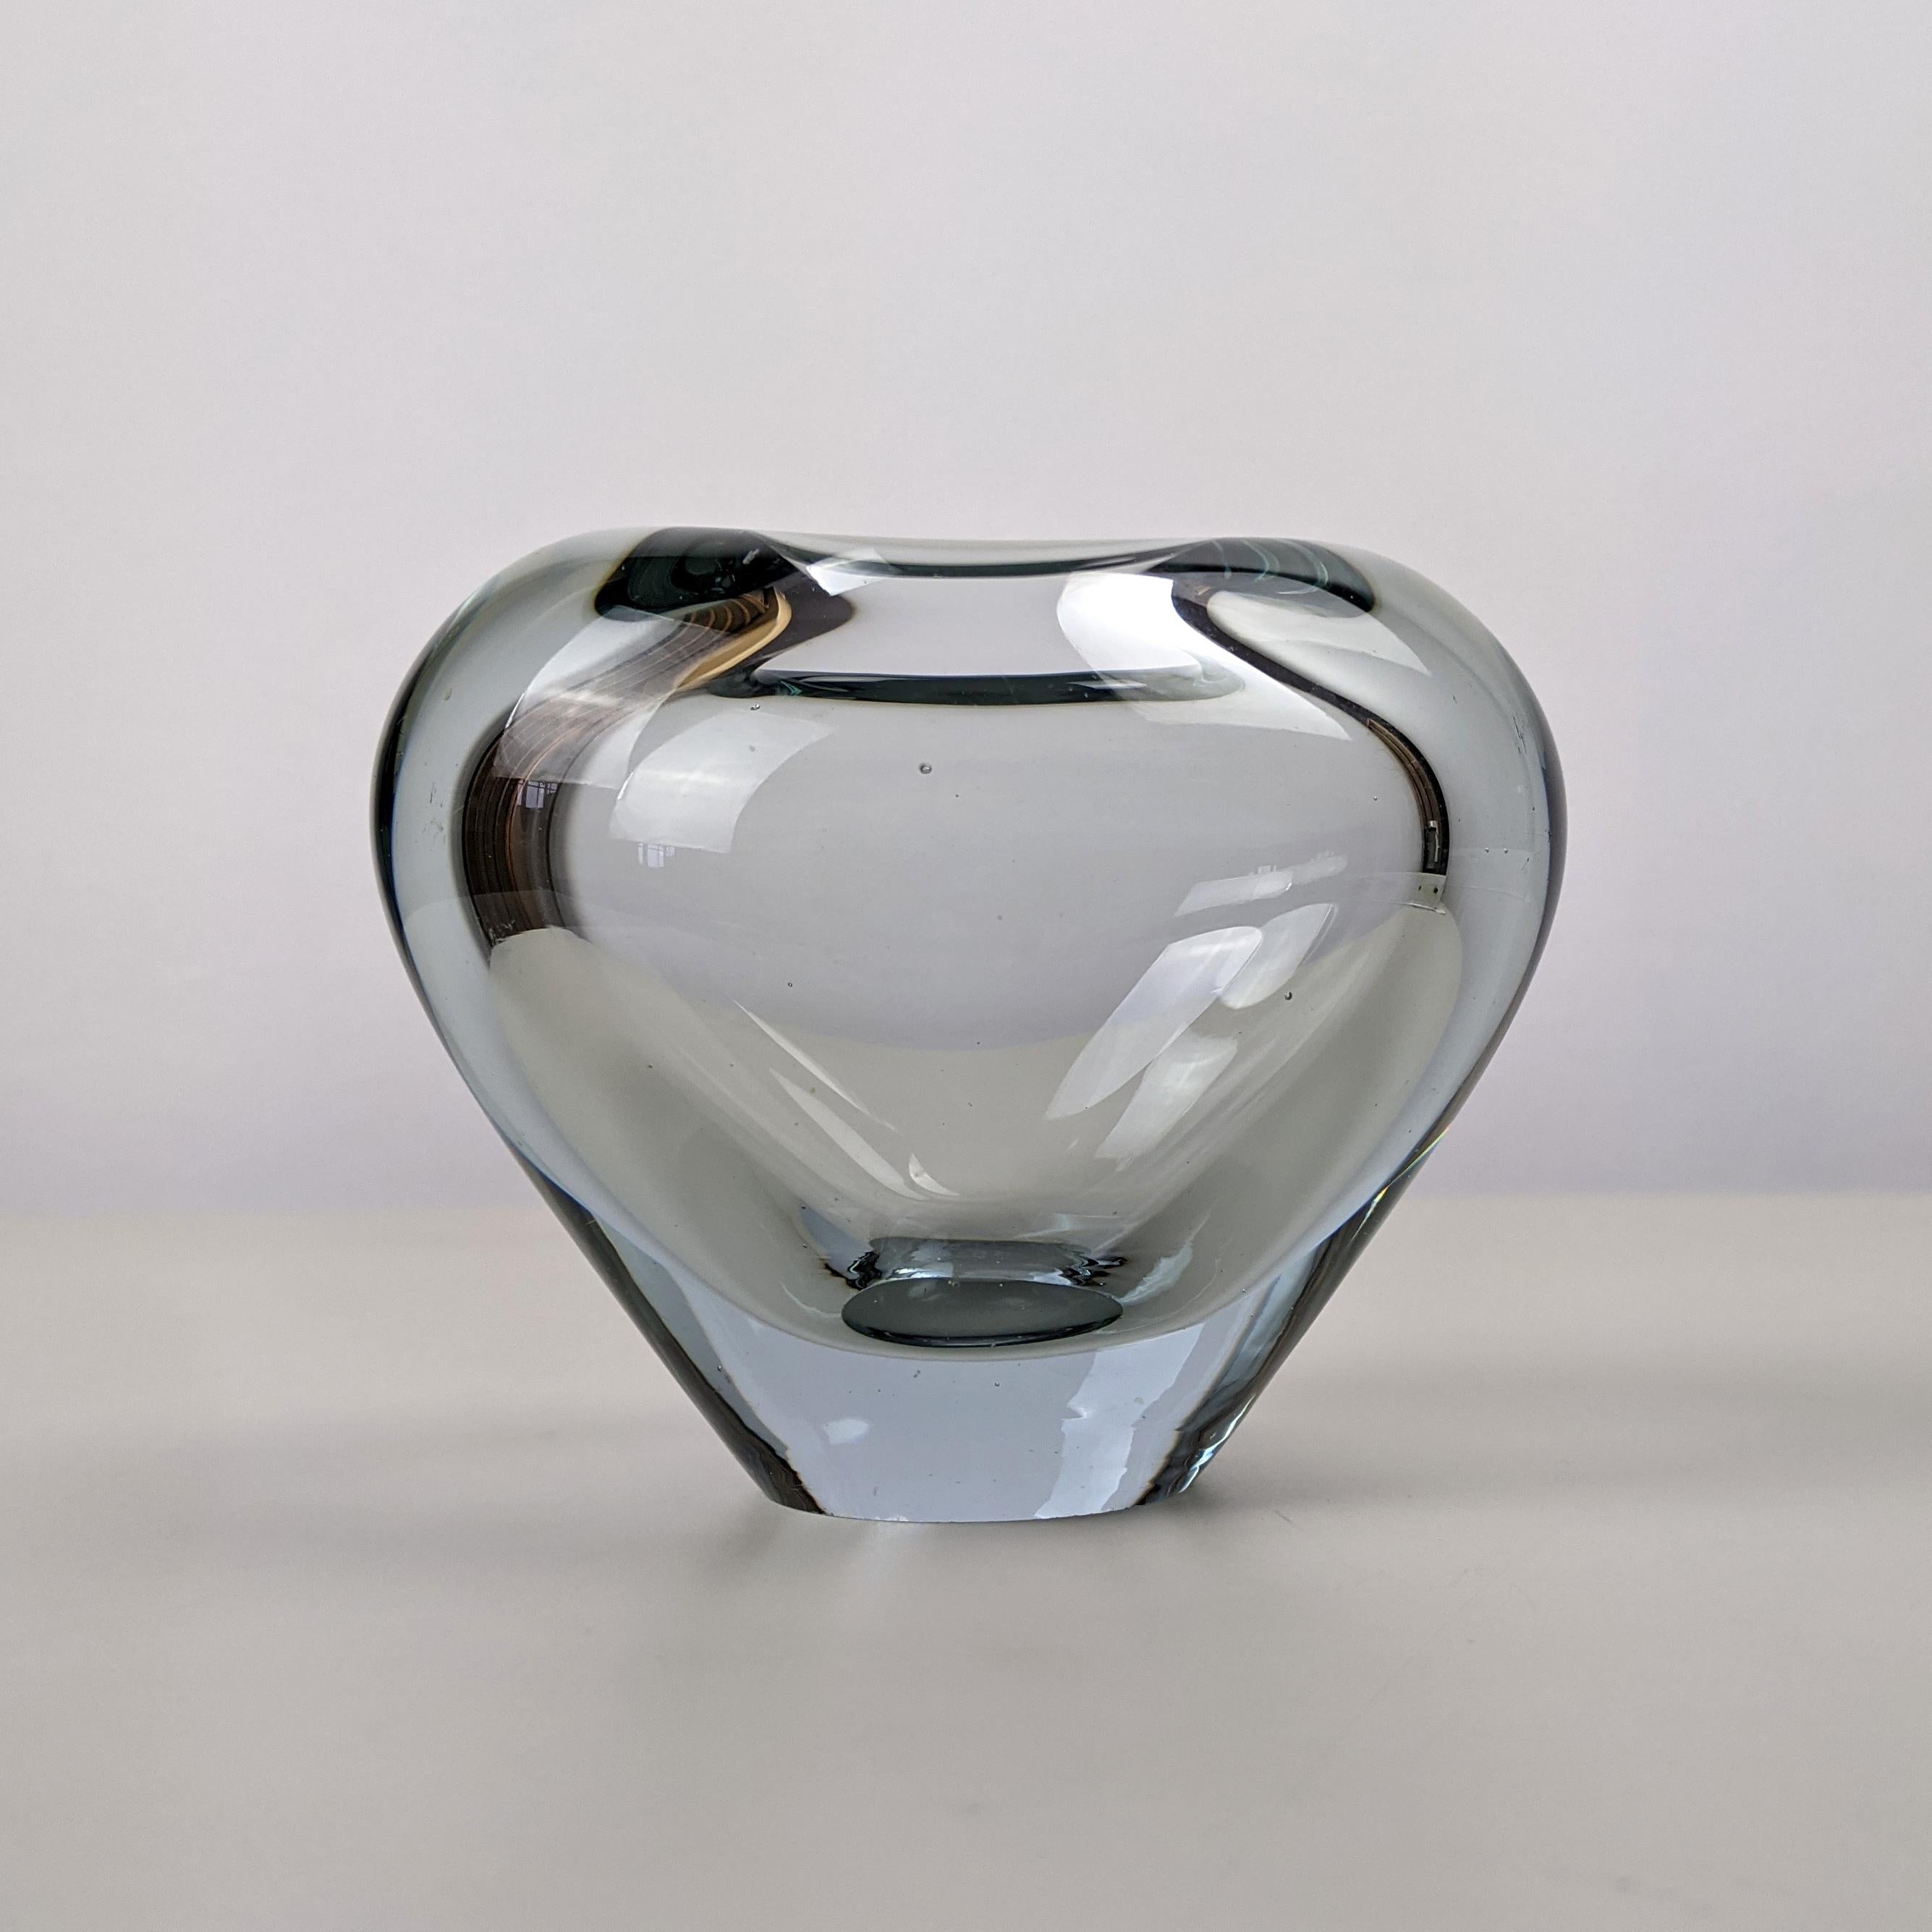 Per Lütken for Holmegaard
Heart-shaped vase from the 'Menuet' series, designed 1957, this example from 1961

Clear grey-blue tinted blown glass
Underside engraved 'PL 1961 Holmegaard'
Excellent condition

Dimensions, approx..:
Width 10.5cm,